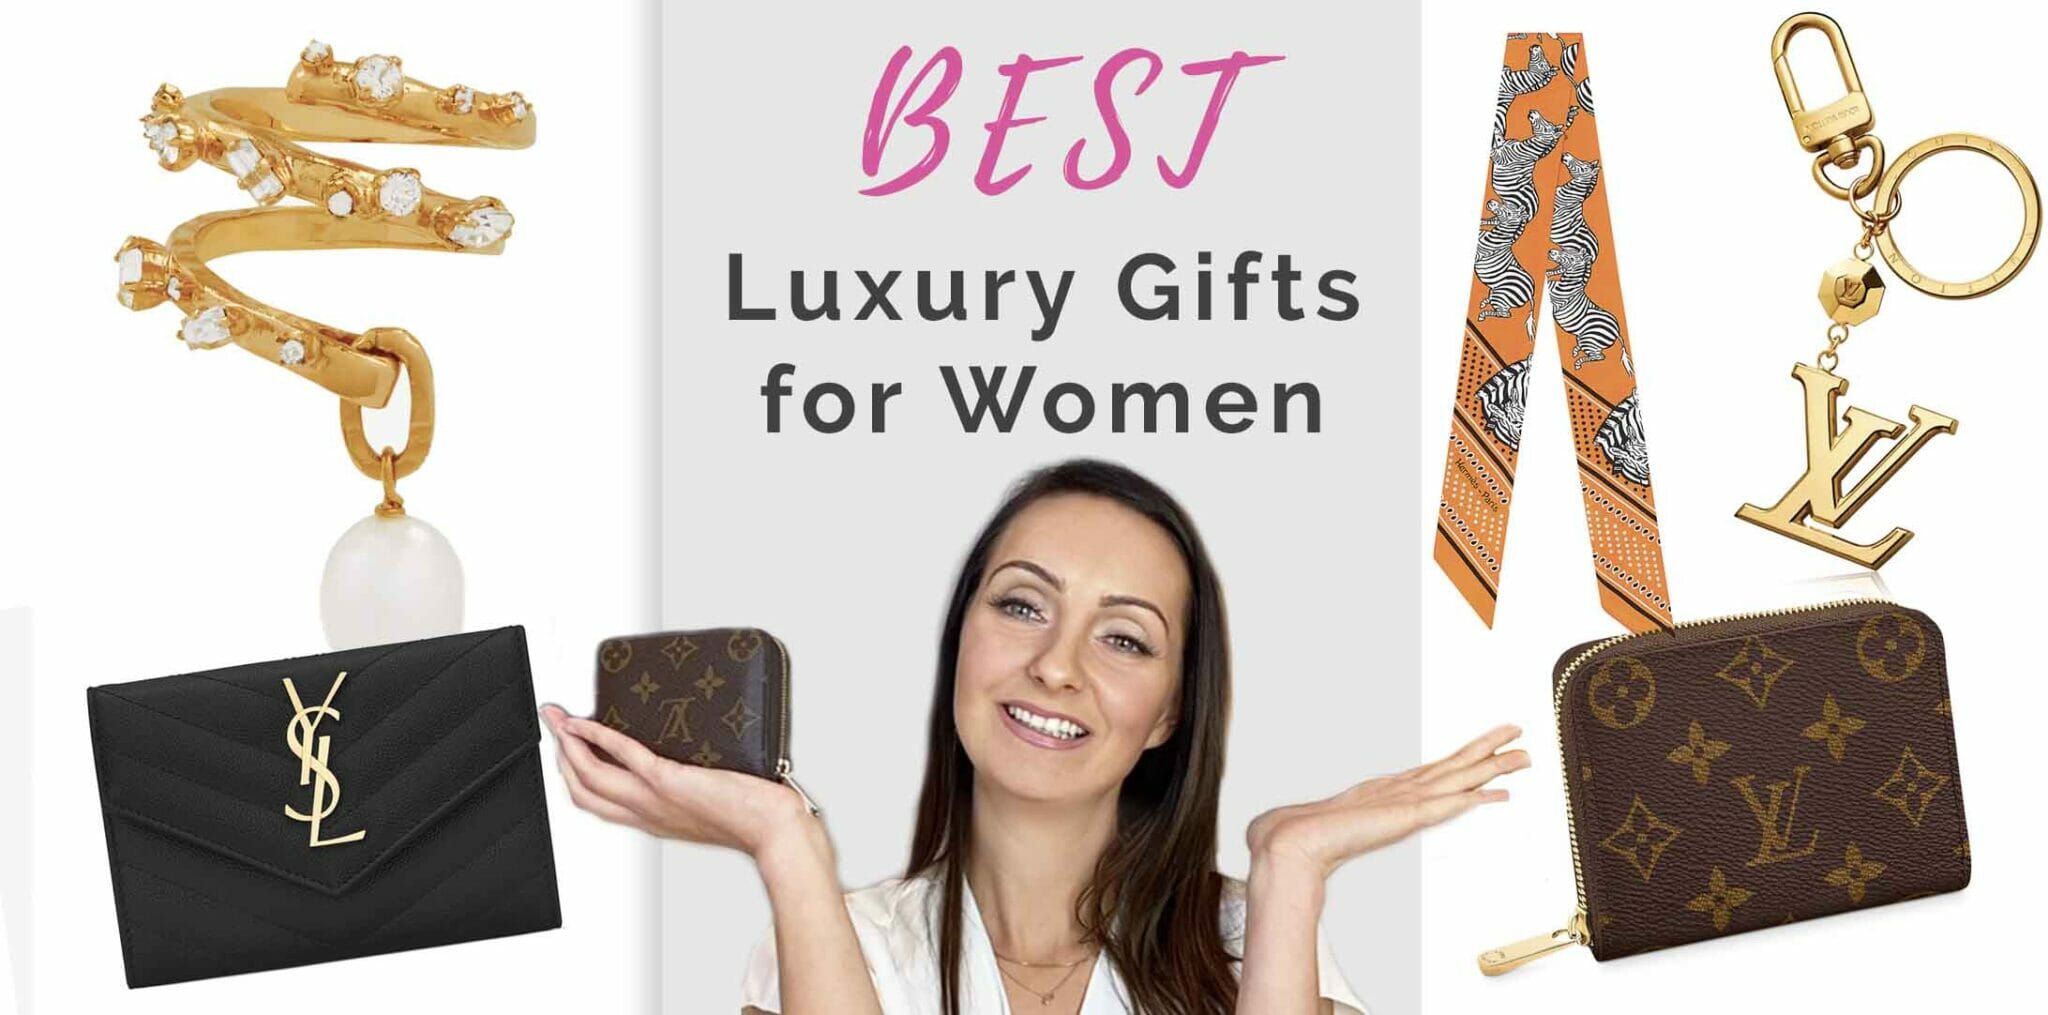 BEST Luxury Gifts for Her Under 300 with Video - Handbagholic